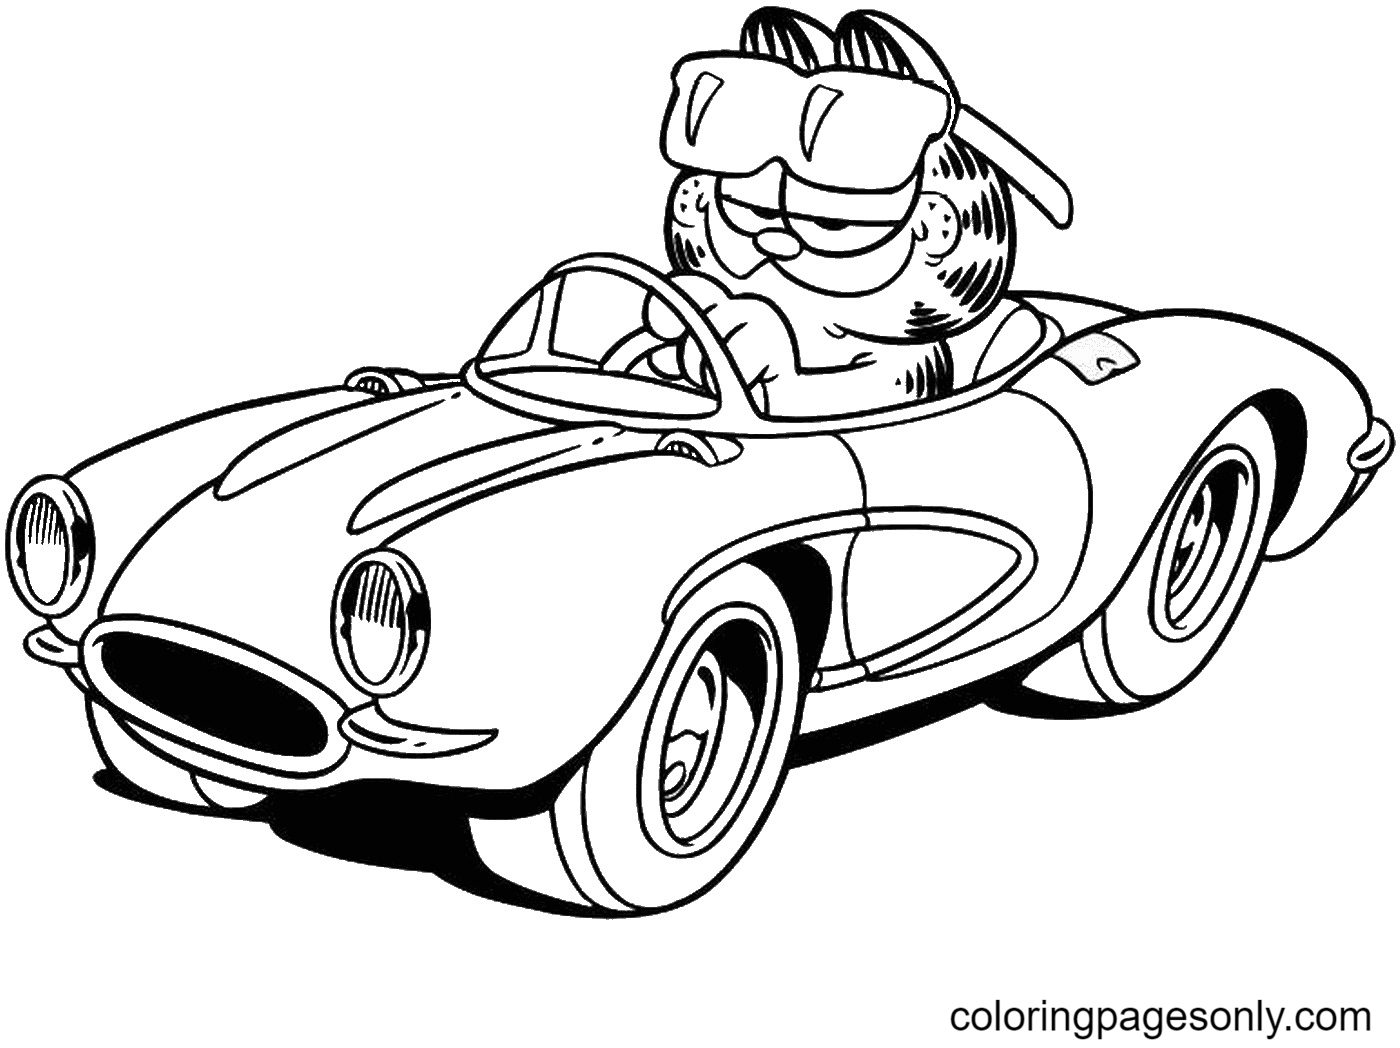 Garfield On The Car Coloring Page